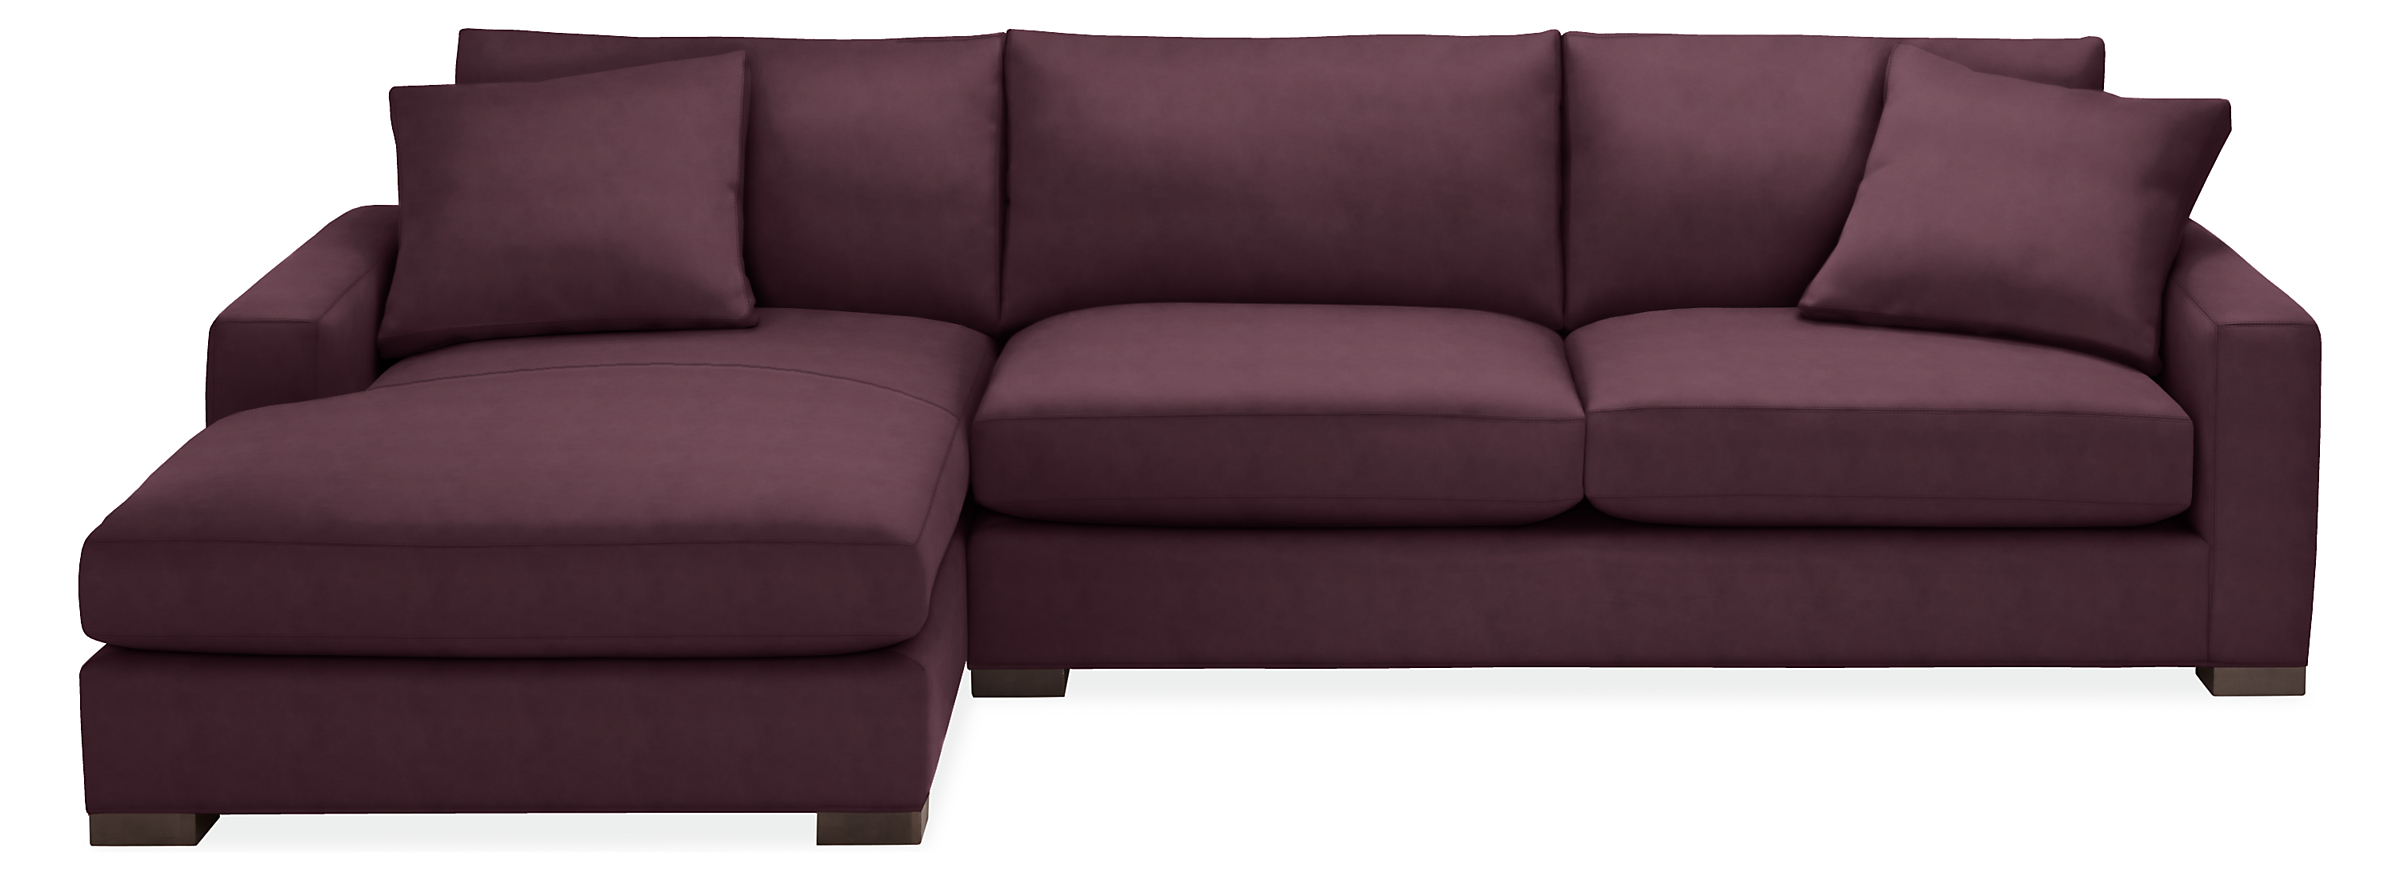 Metro Deep 124" Sofa w/Left-Arm Chaise in View Eggplant with Charcoal Legs